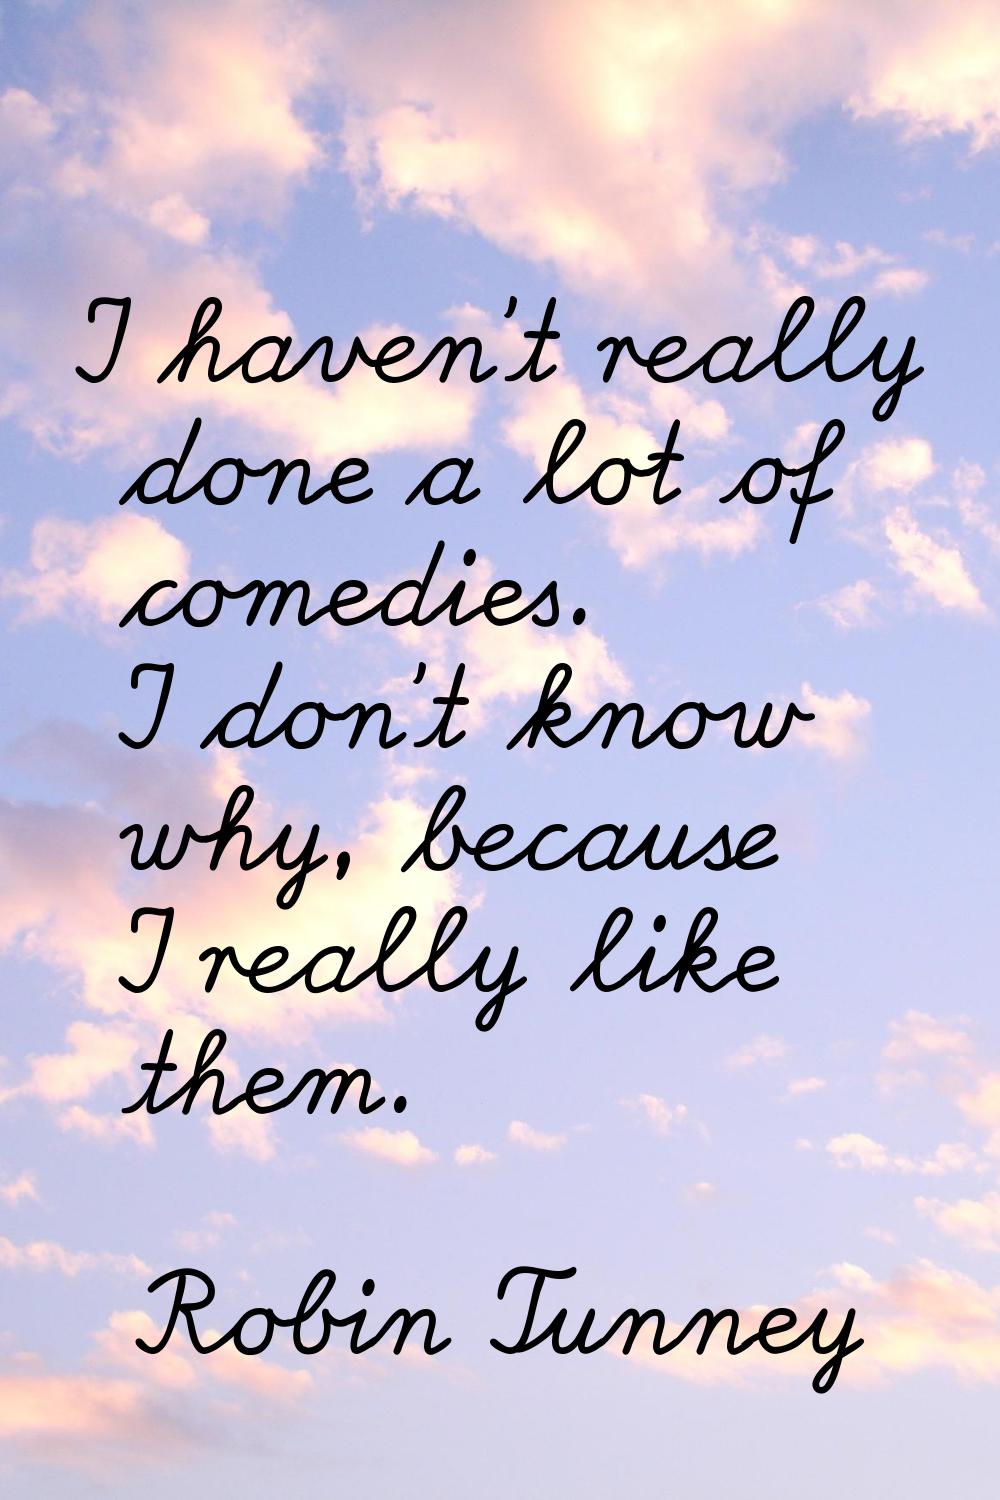 I haven't really done a lot of comedies. I don't know why, because I really like them.